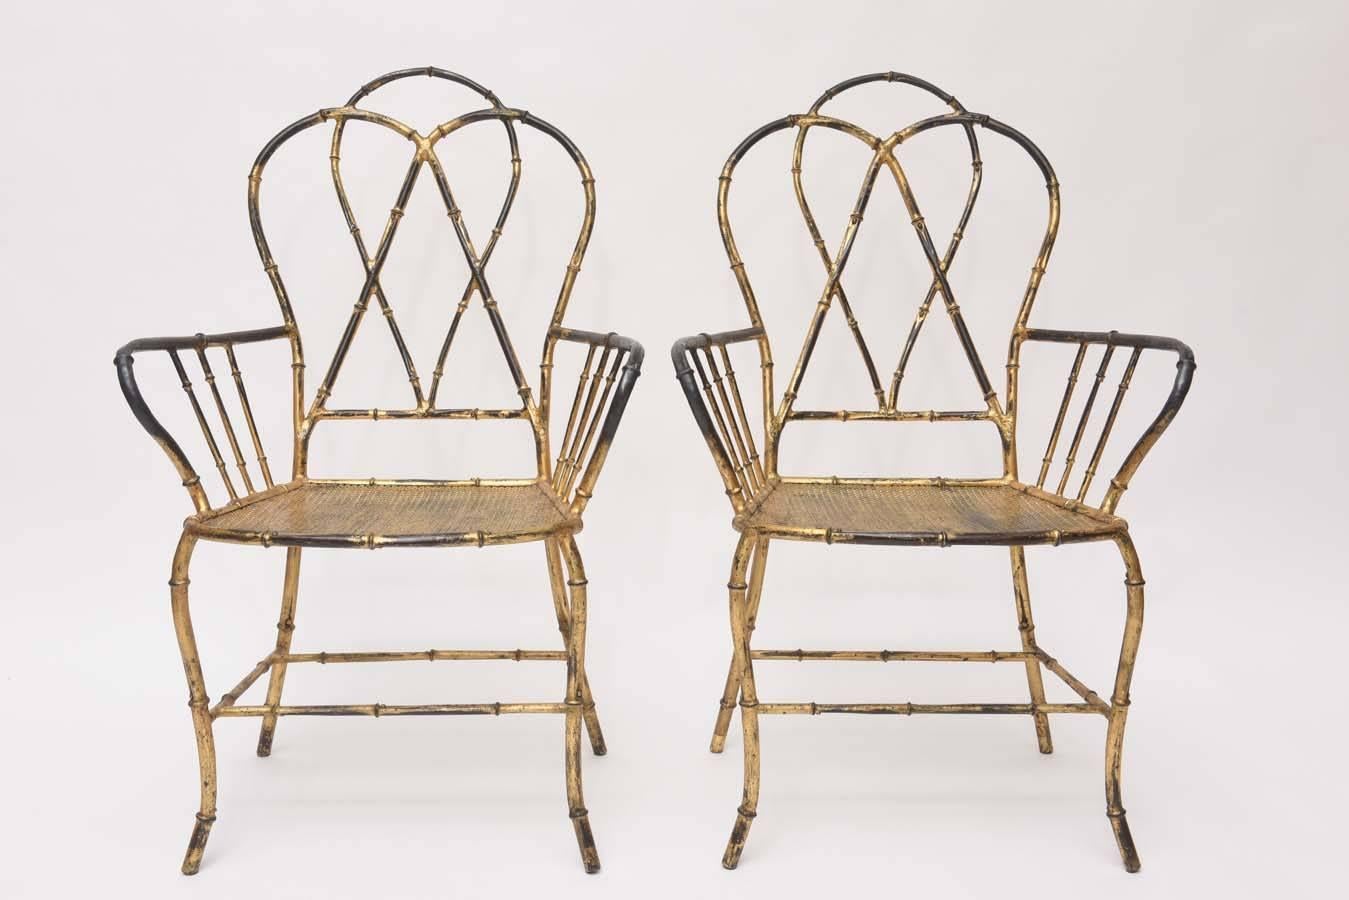 Charming pair of Italian gilt metal faux bamboo chairs, beautifully distressed to perfection!